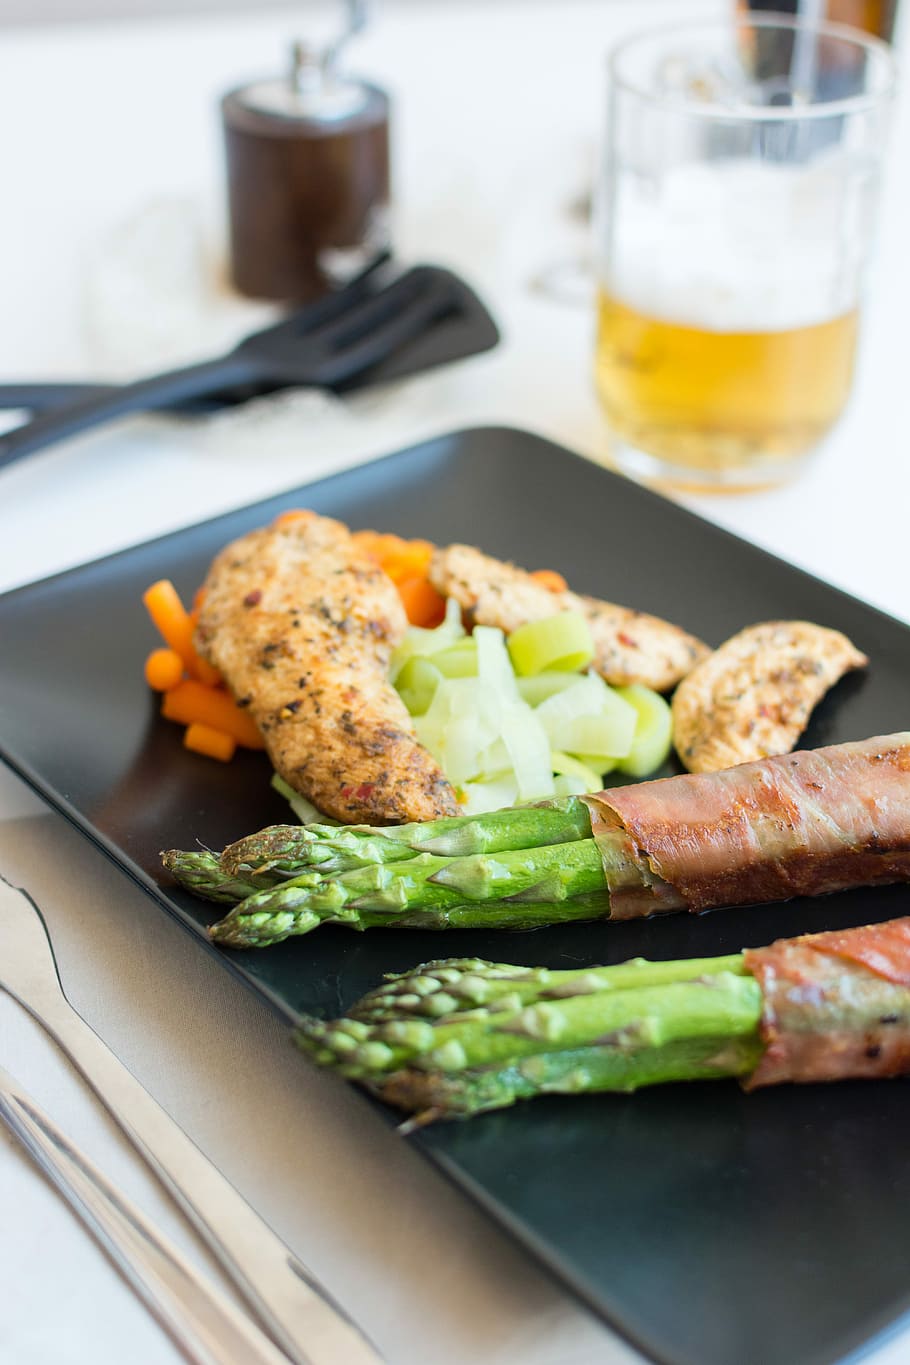 Chicken steak with vegetables and beer, asparagus, healthy, meat